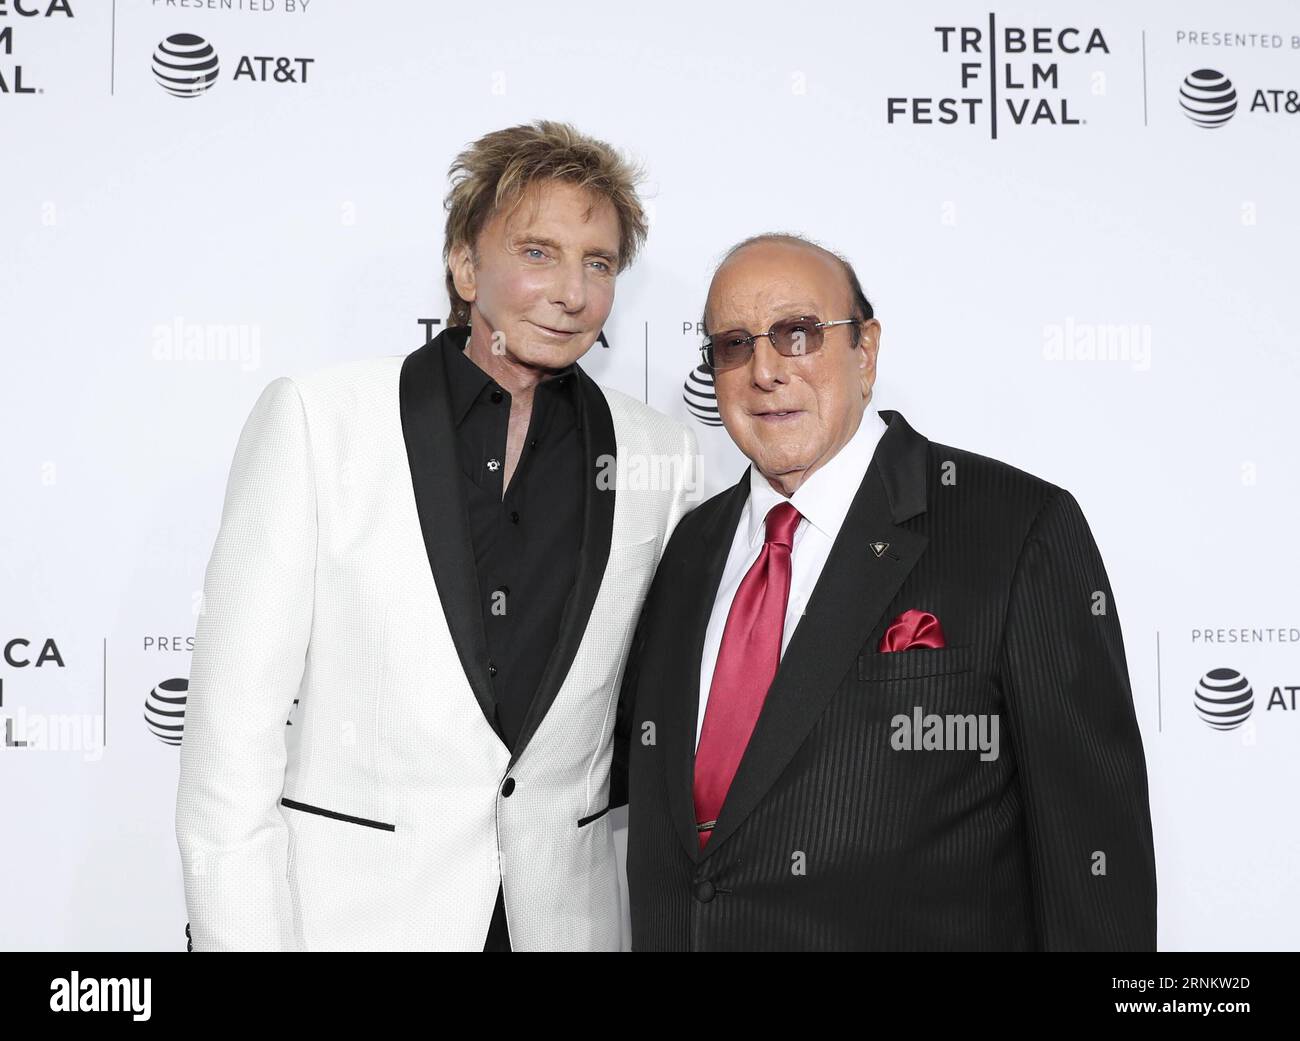 (170420) -- NEW YORK, April 20, 2017 -- Singer Barry Manilow (L) and music mogul Clive Davis attend the opening night of the 2017 Tribeca Film Festival and the world premiere of Clive Davis: The Soundtrack of Our Lives in New York, the United States, April 19, 2017. The 16th annual Tribeca Film Festival opened here Wednesday night, bringing a trove of films, TV events, virtual reality installations and music pieces to New York. ) (djj) U.S.-NEW YORK-TRIBECA FILM FESTIVAL-OPEN WangxYing PUBLICATIONxNOTxINxCHN   New York April 20 2017 Singer Barry Manilow l and Music Mogul Clive Davis attend The Stock Photo